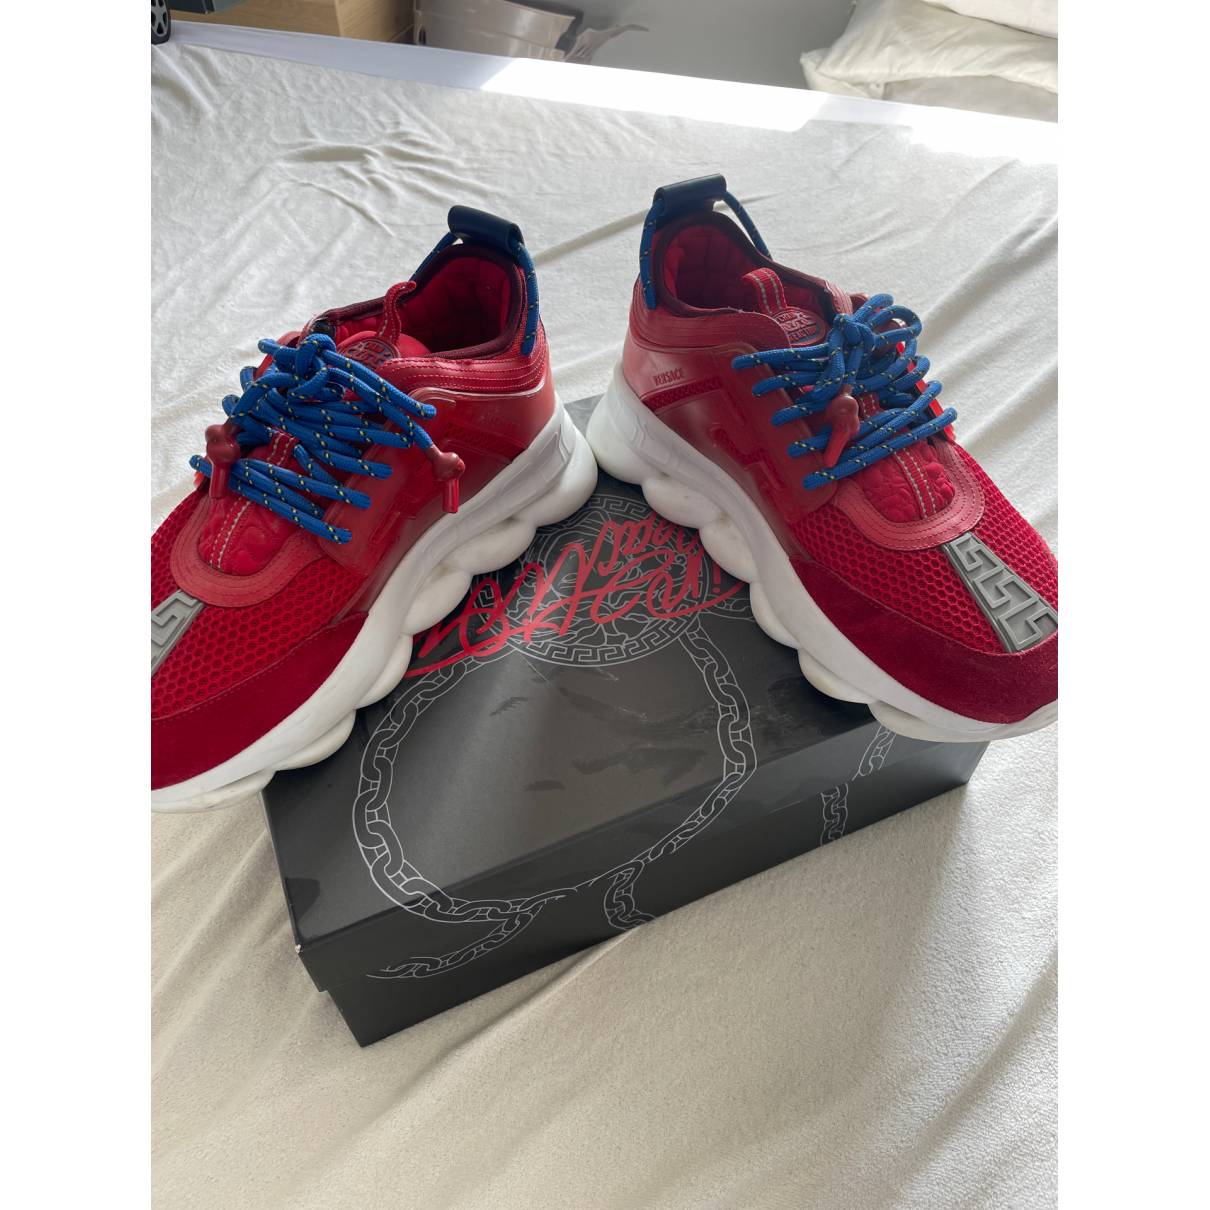 versace chain reaction red